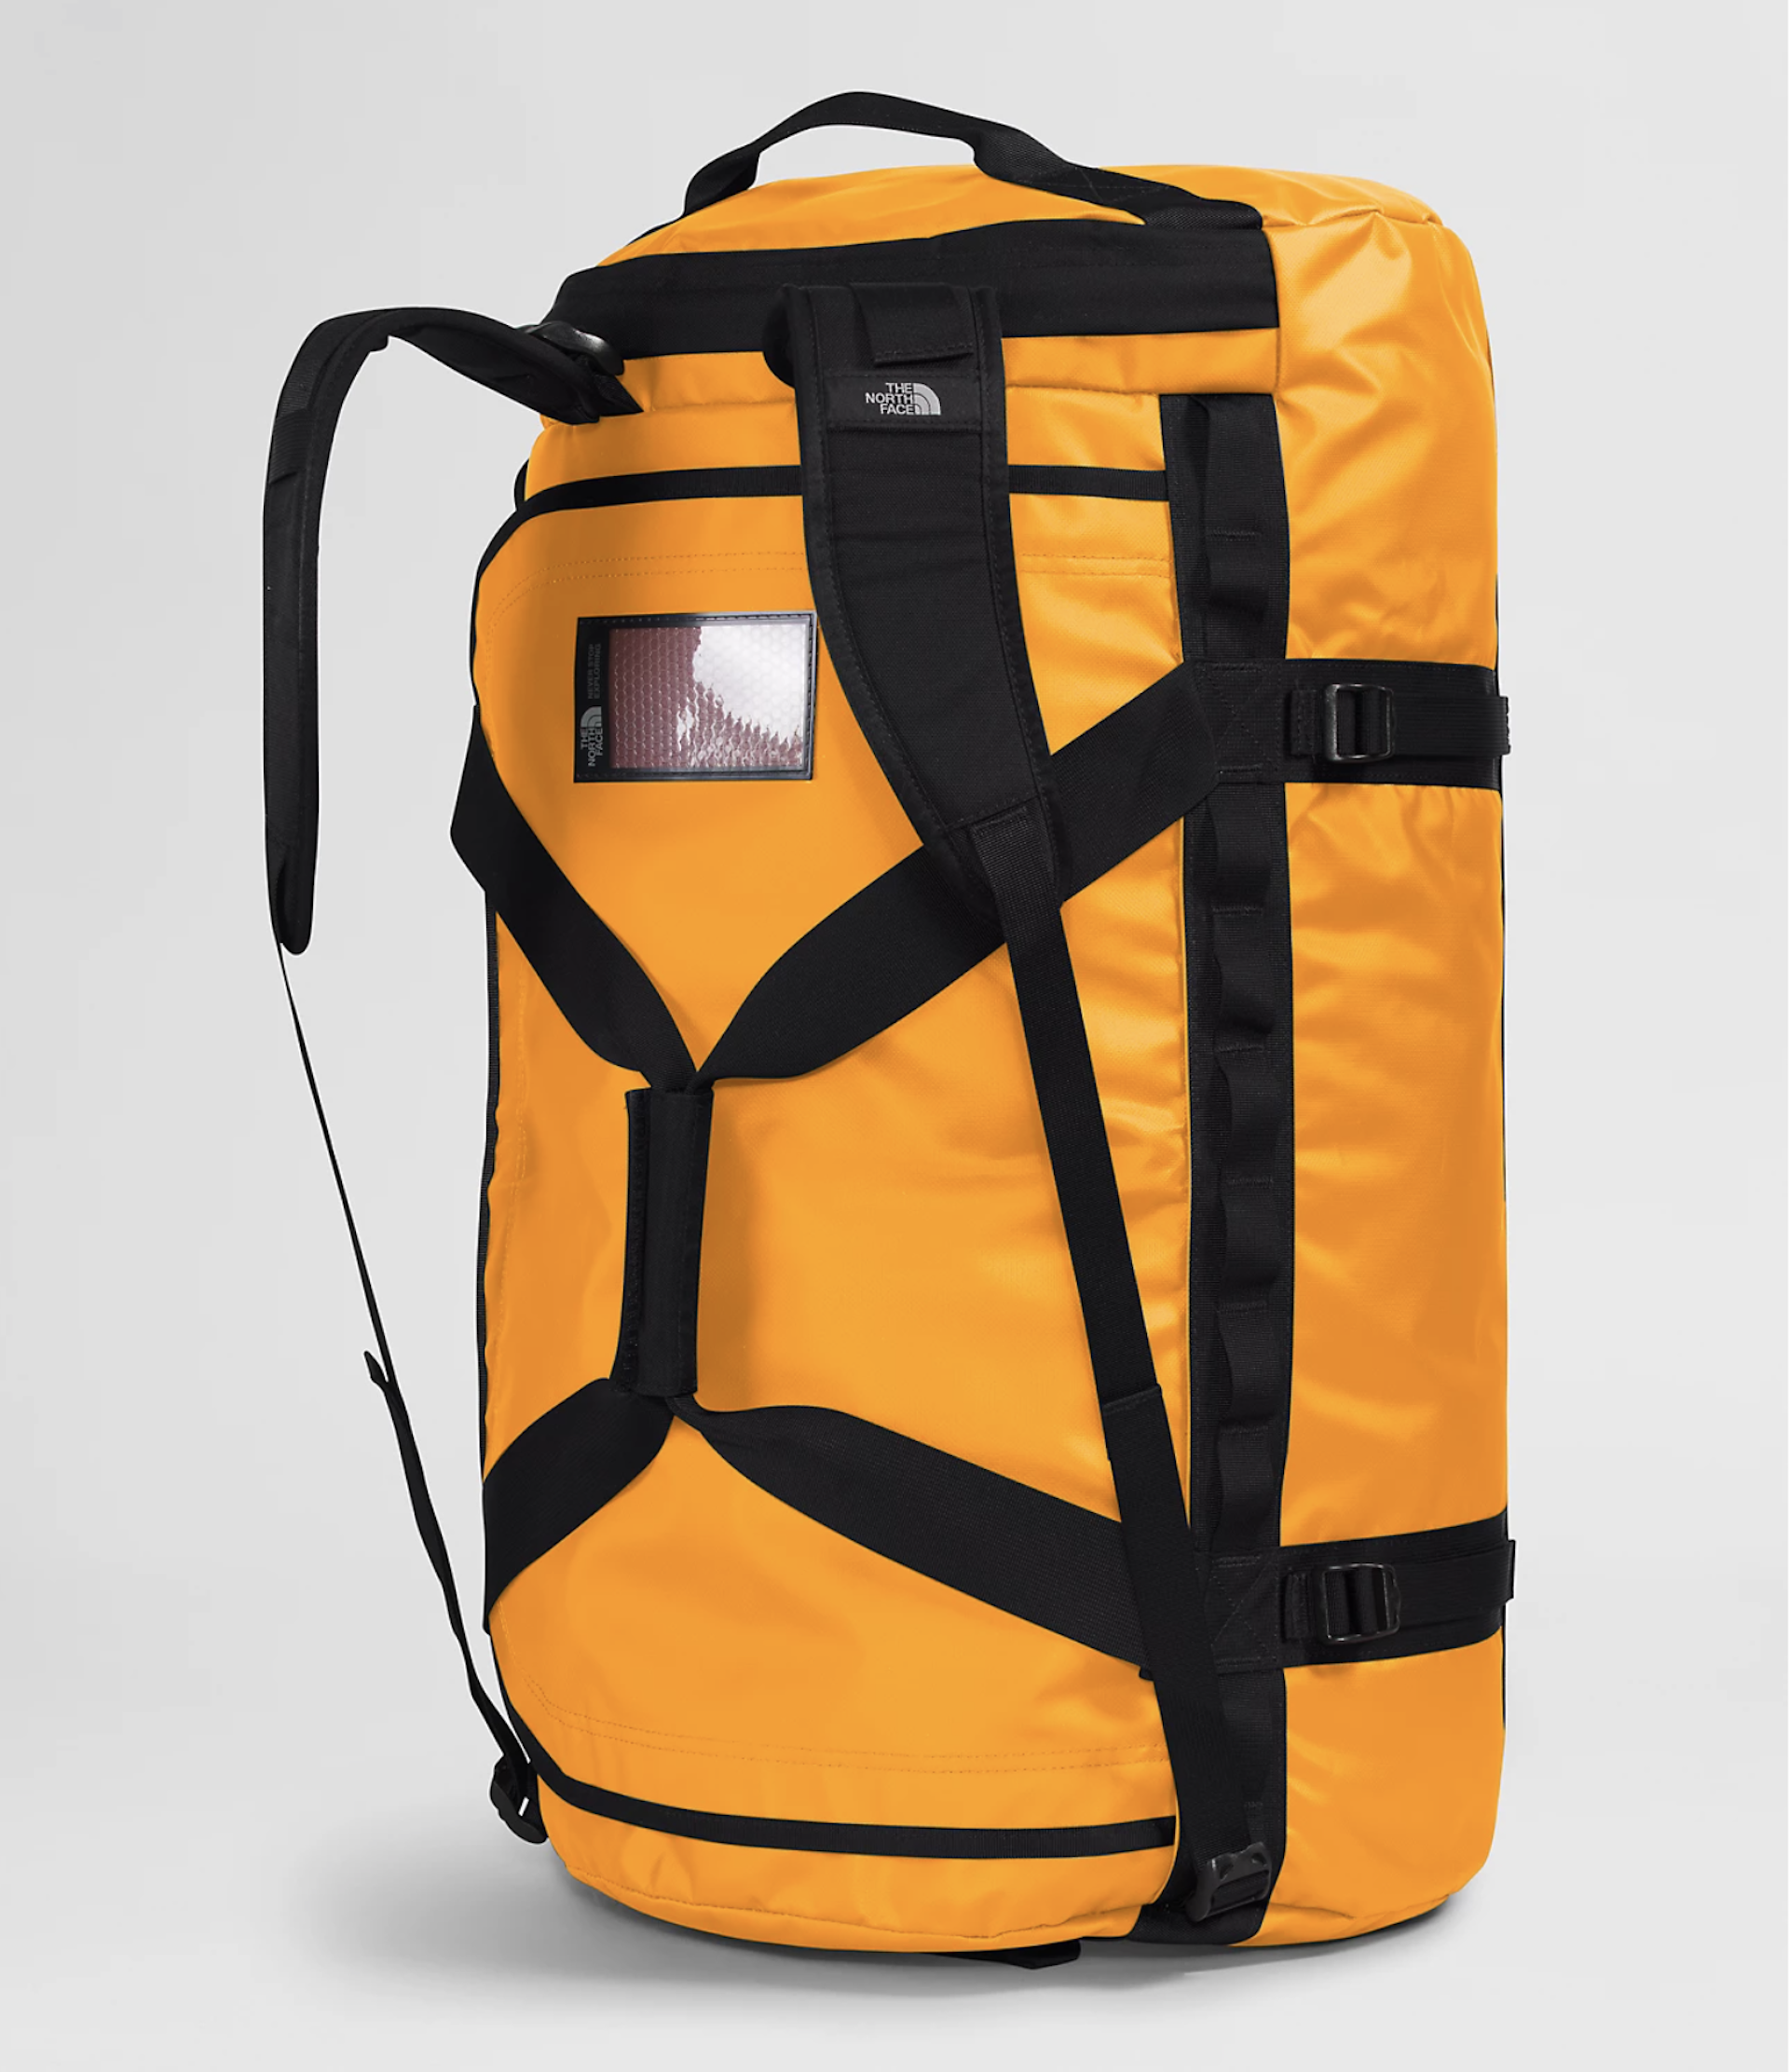 Yellow duffel bag from North Face